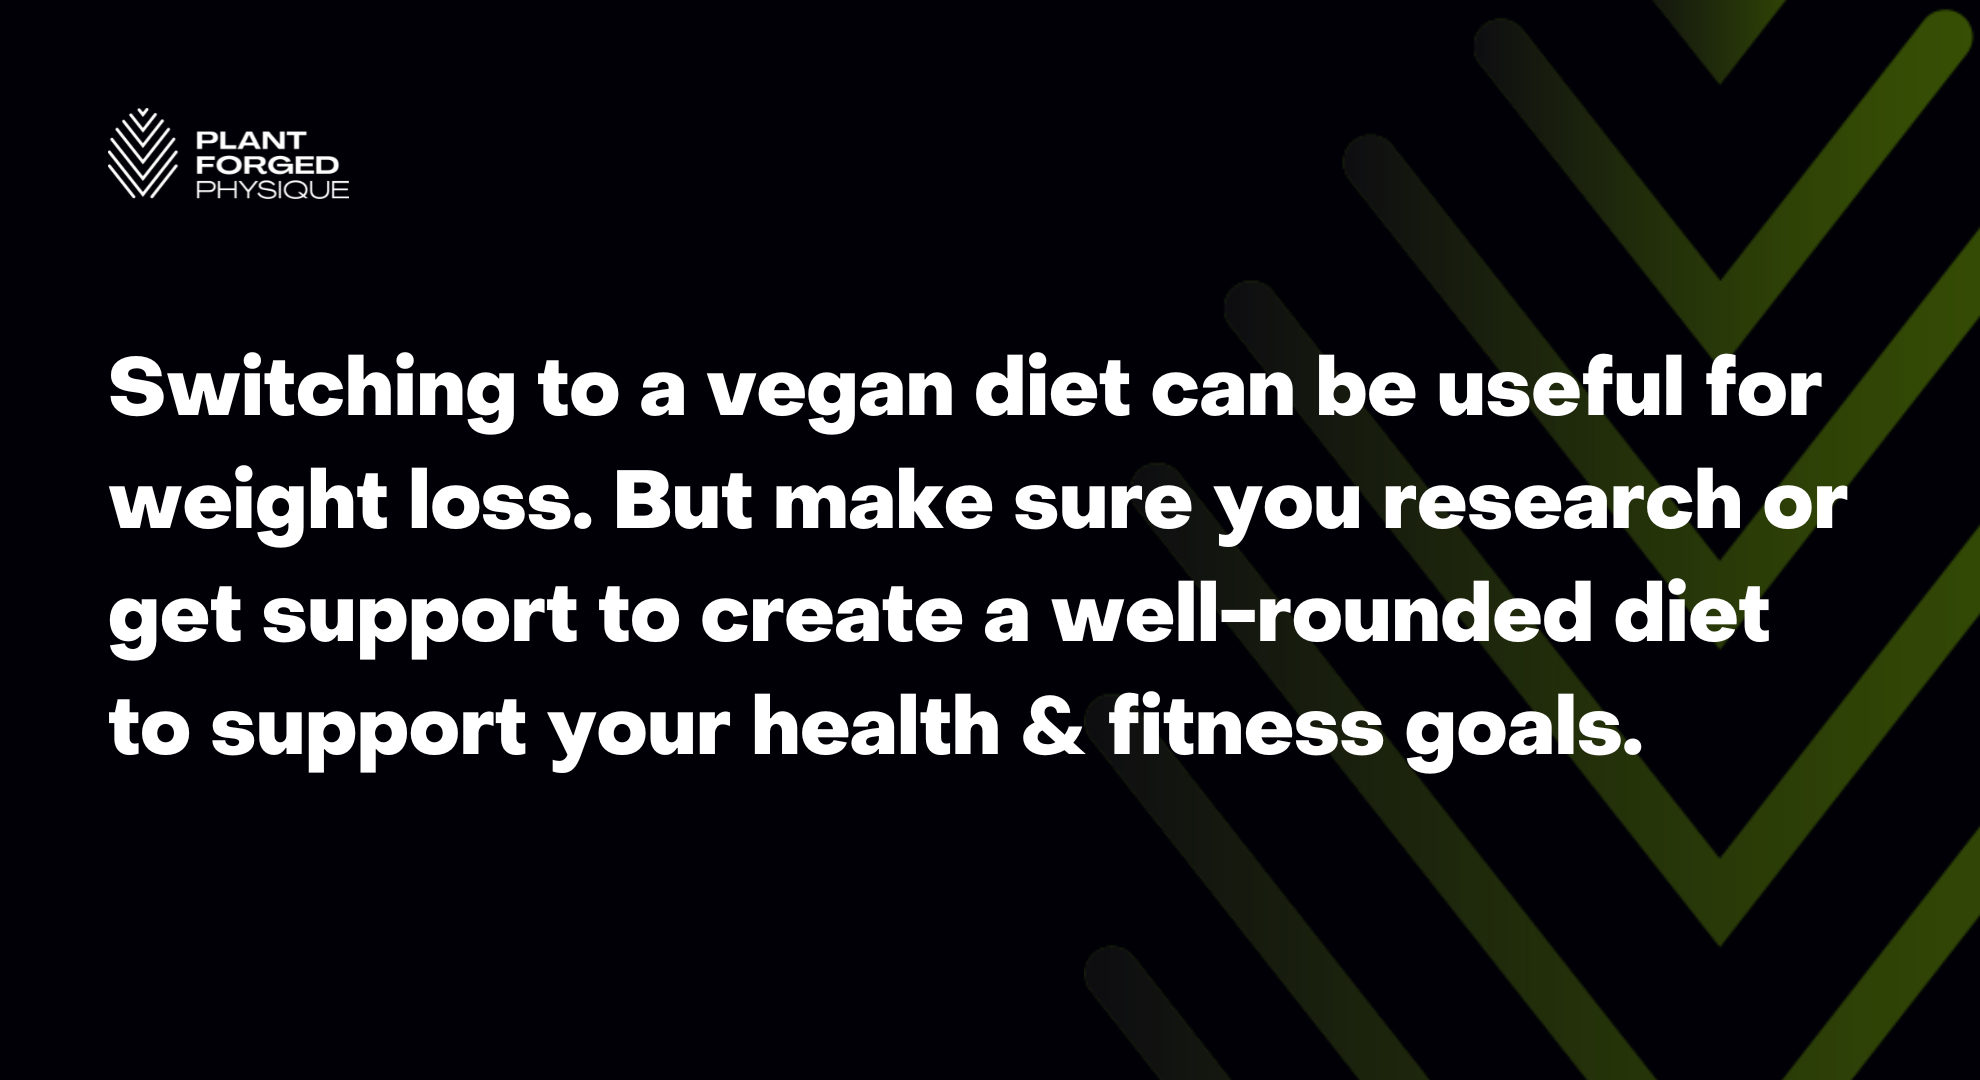 Switching to a vegan diet can be useful for weight loss. But make sure you research or get support to create a well-rounded diet to support your health & fitness goals.